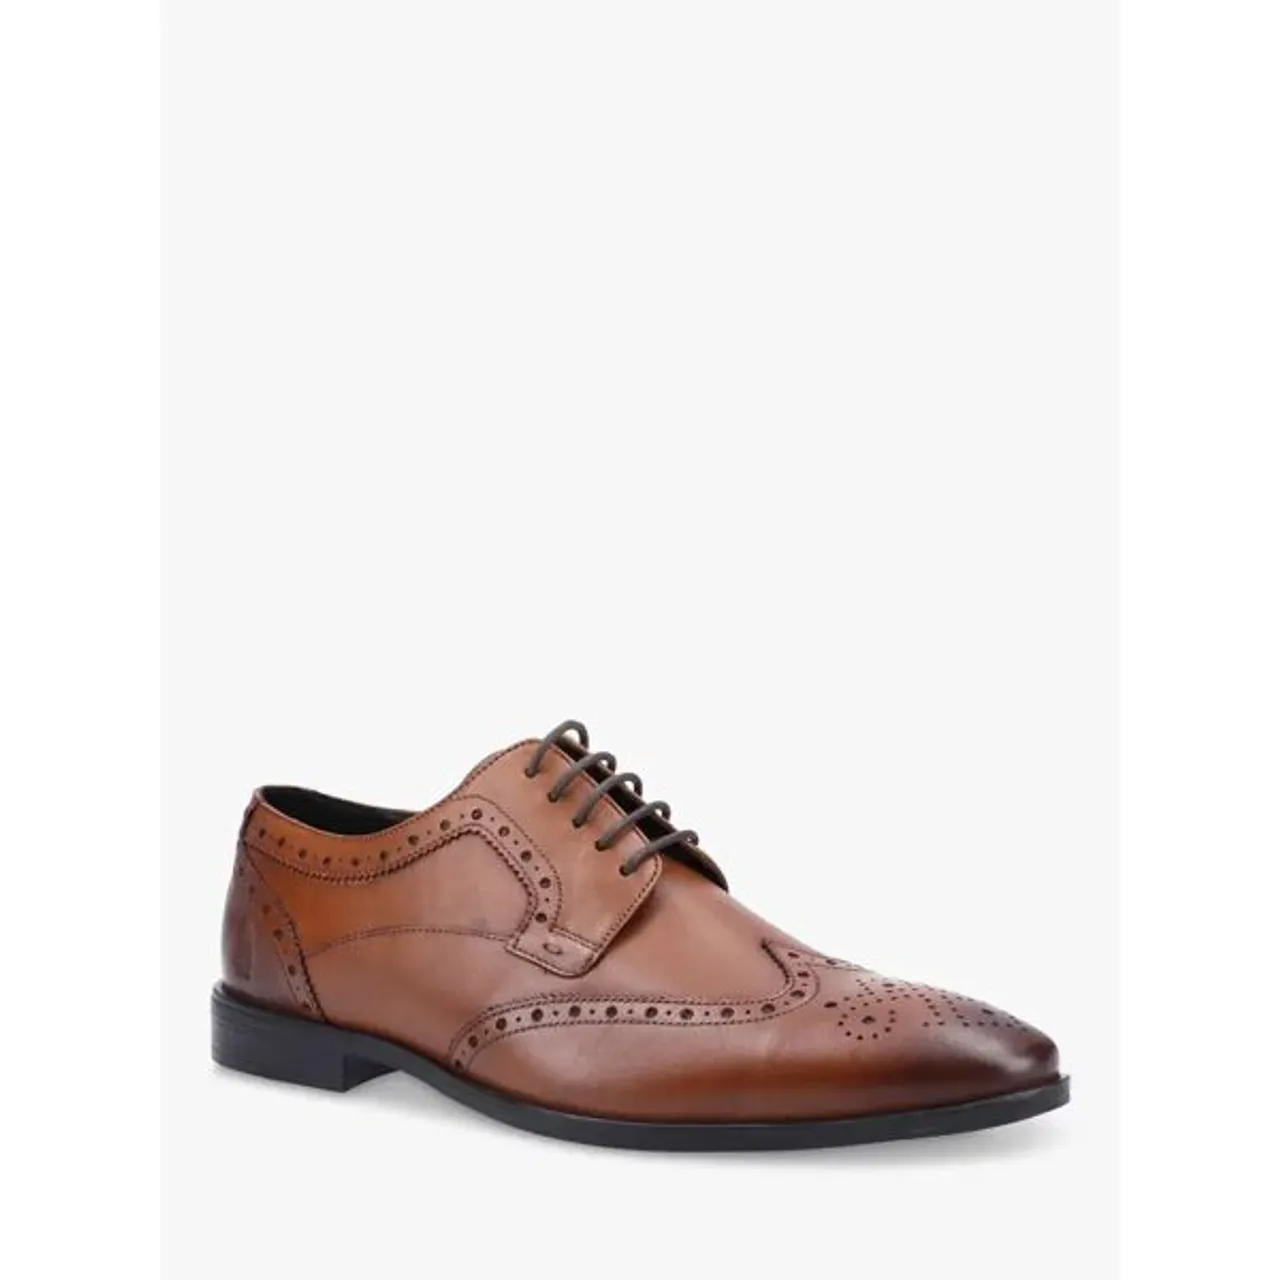 Hush Puppies Elliot Brogue Leather Shoes - Tan - Male